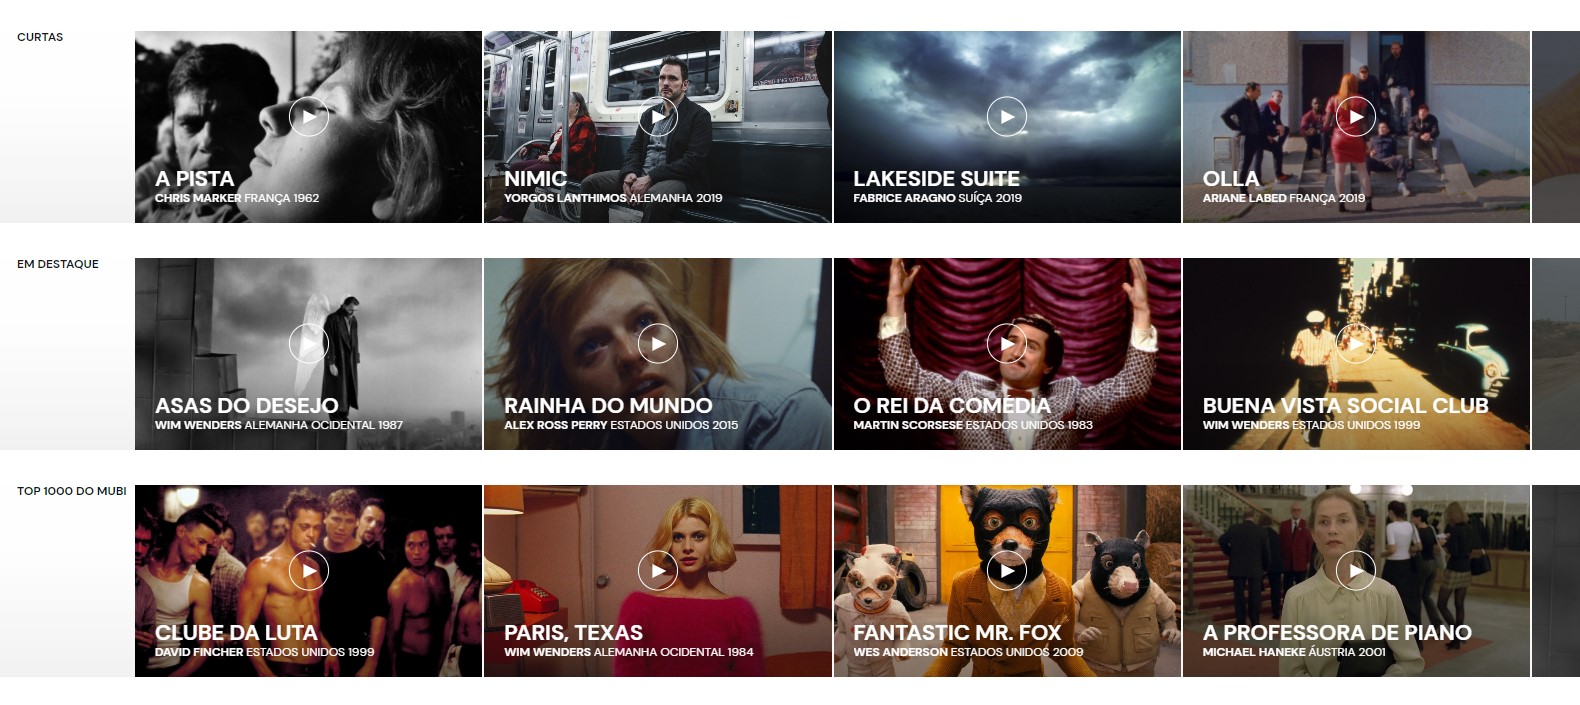 Mubi has a large selection of films divided into several categories.